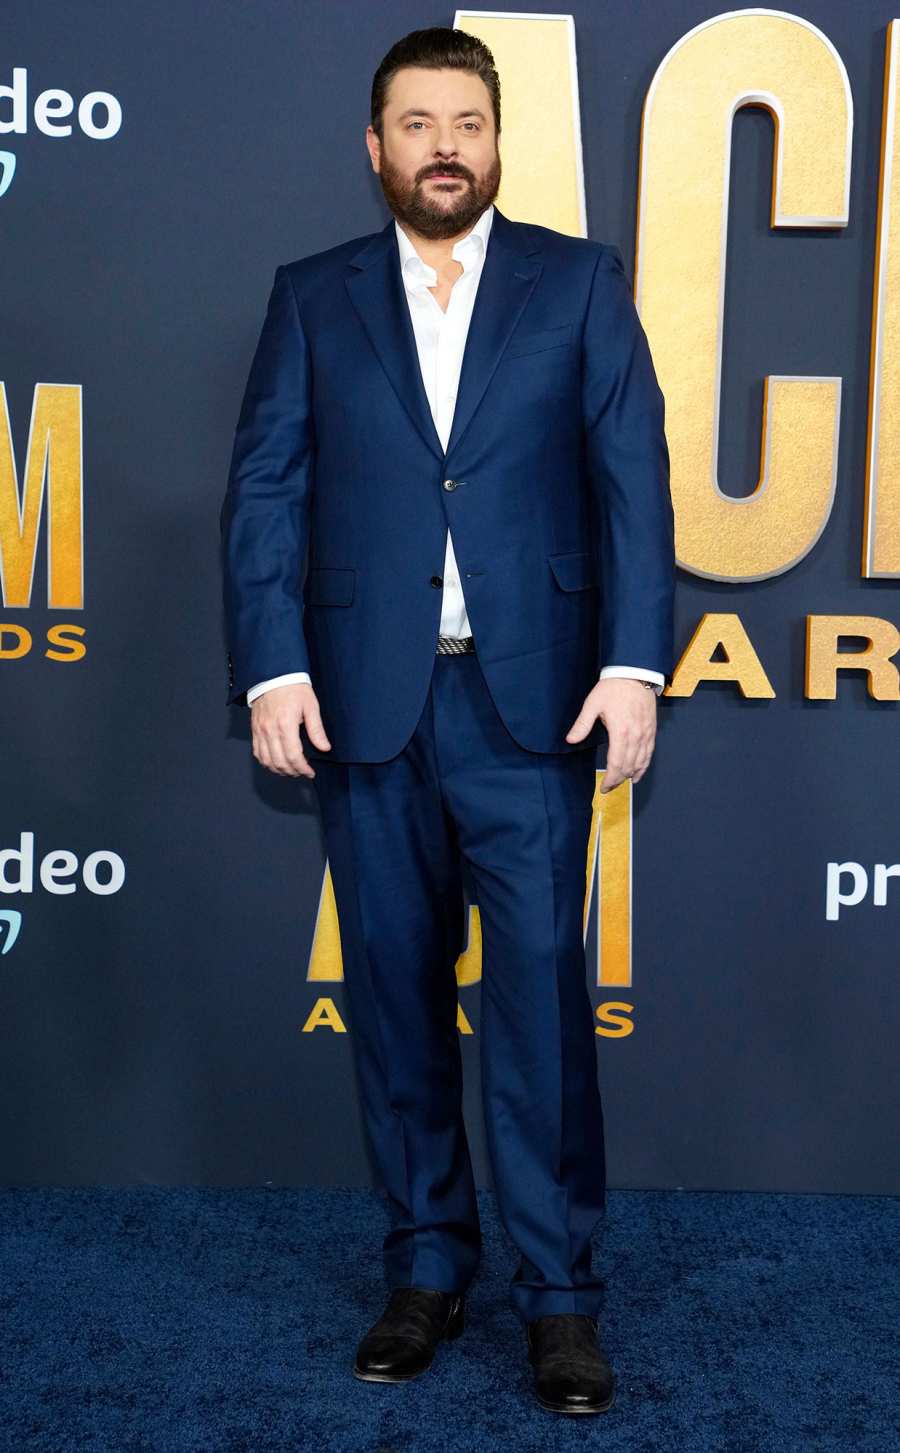 Chris Young The Best Dressed Hottest Men at the ACM Awards 2022